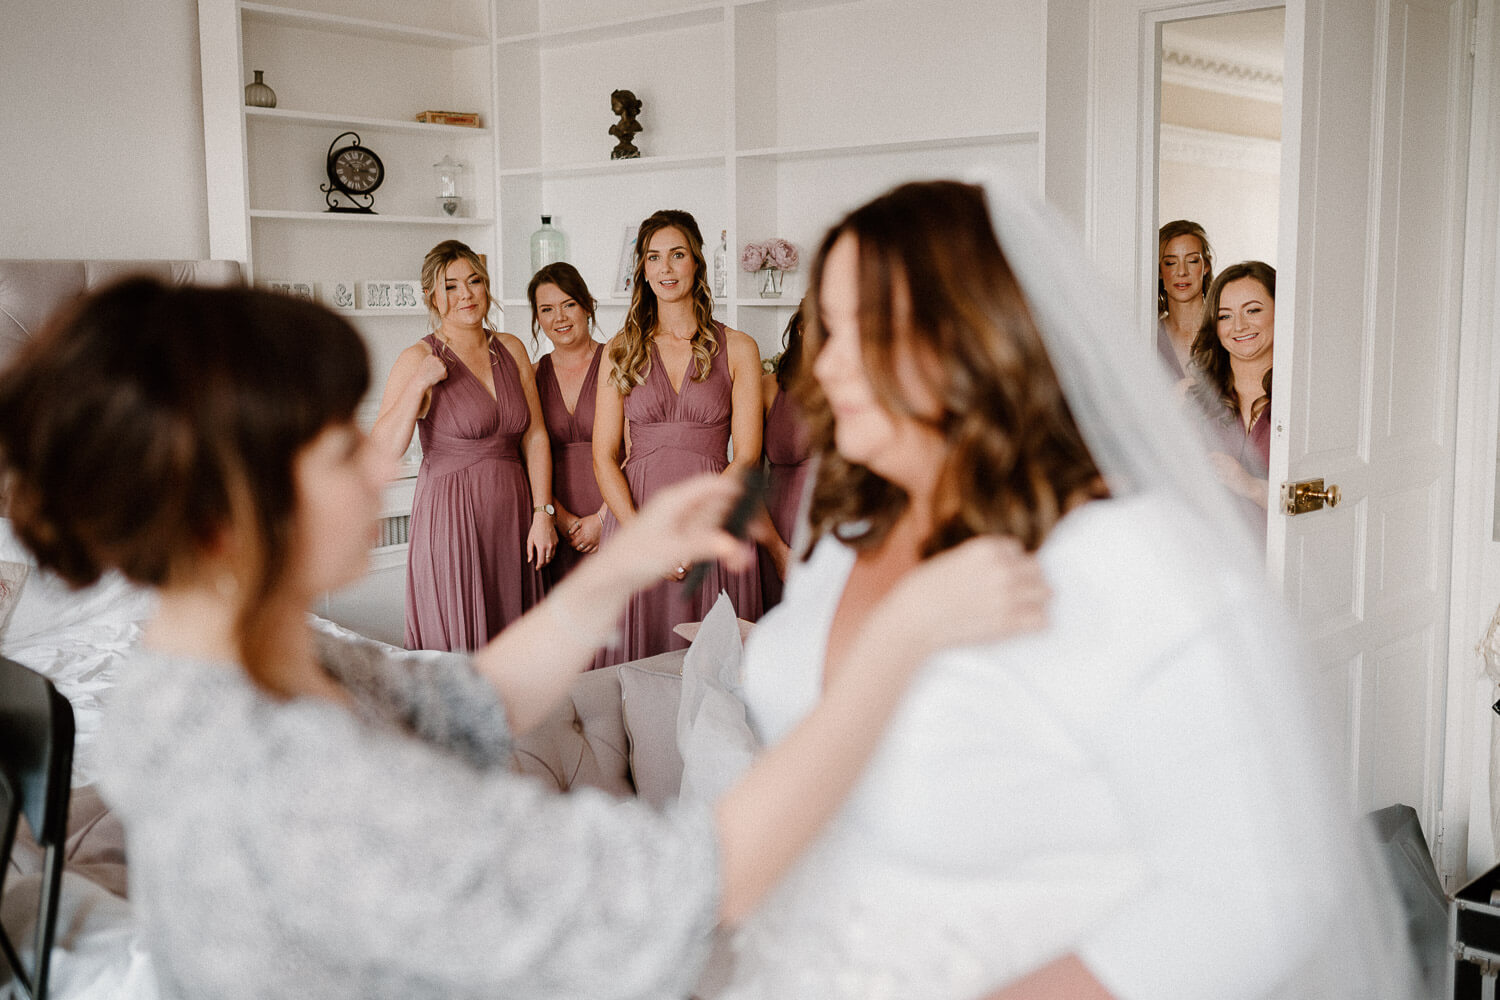 Hair stylist makes finishing touches to bride as bridesmaids look on.